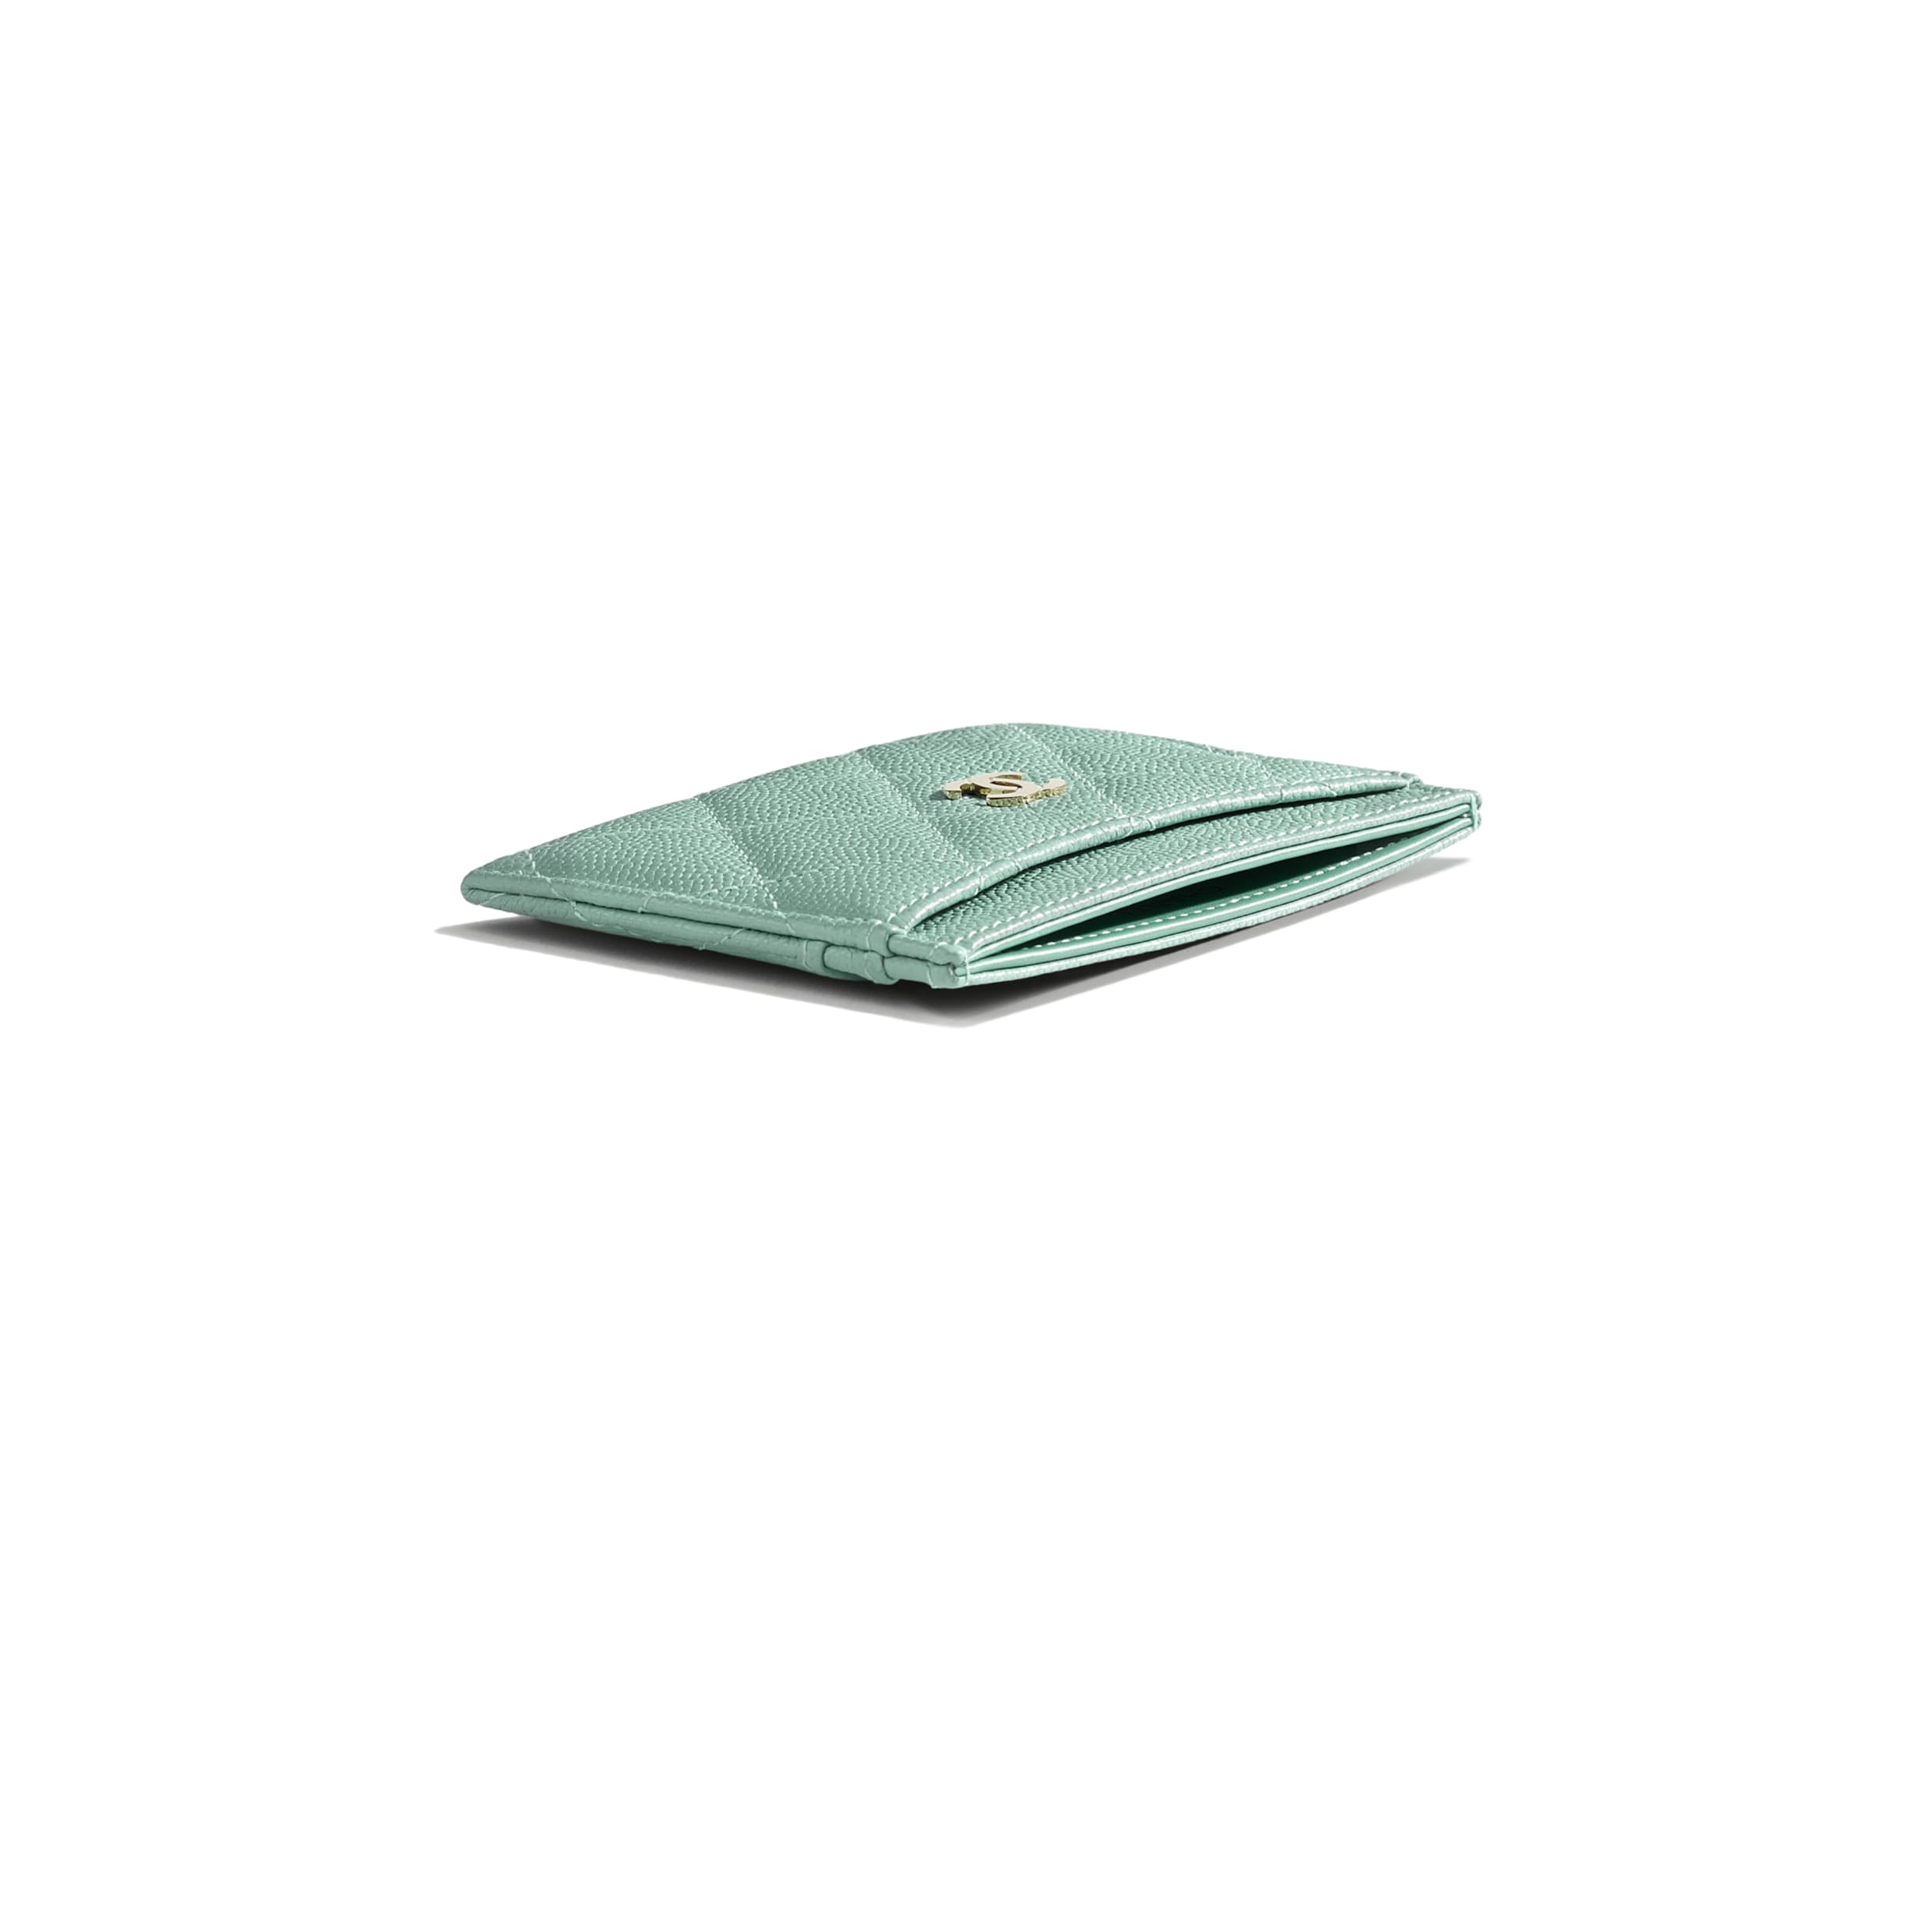 Chanel Classic Card Holder Iridescent Turquoise